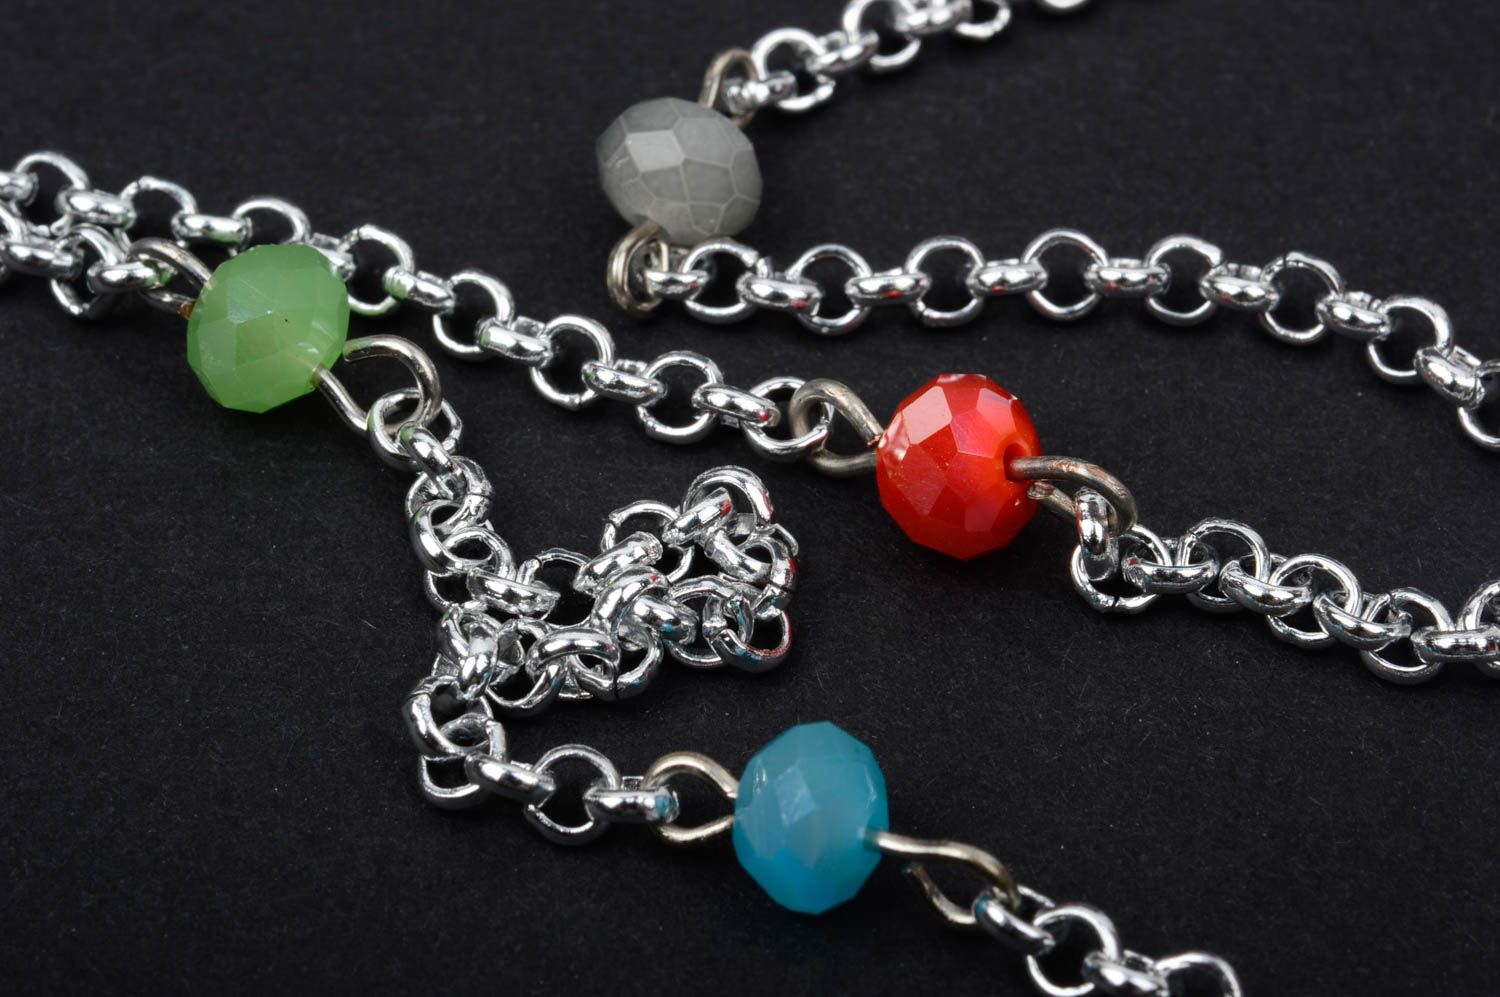 Chain necklace metal jewelry handmade necklace designer accessories cool gifts photo 5